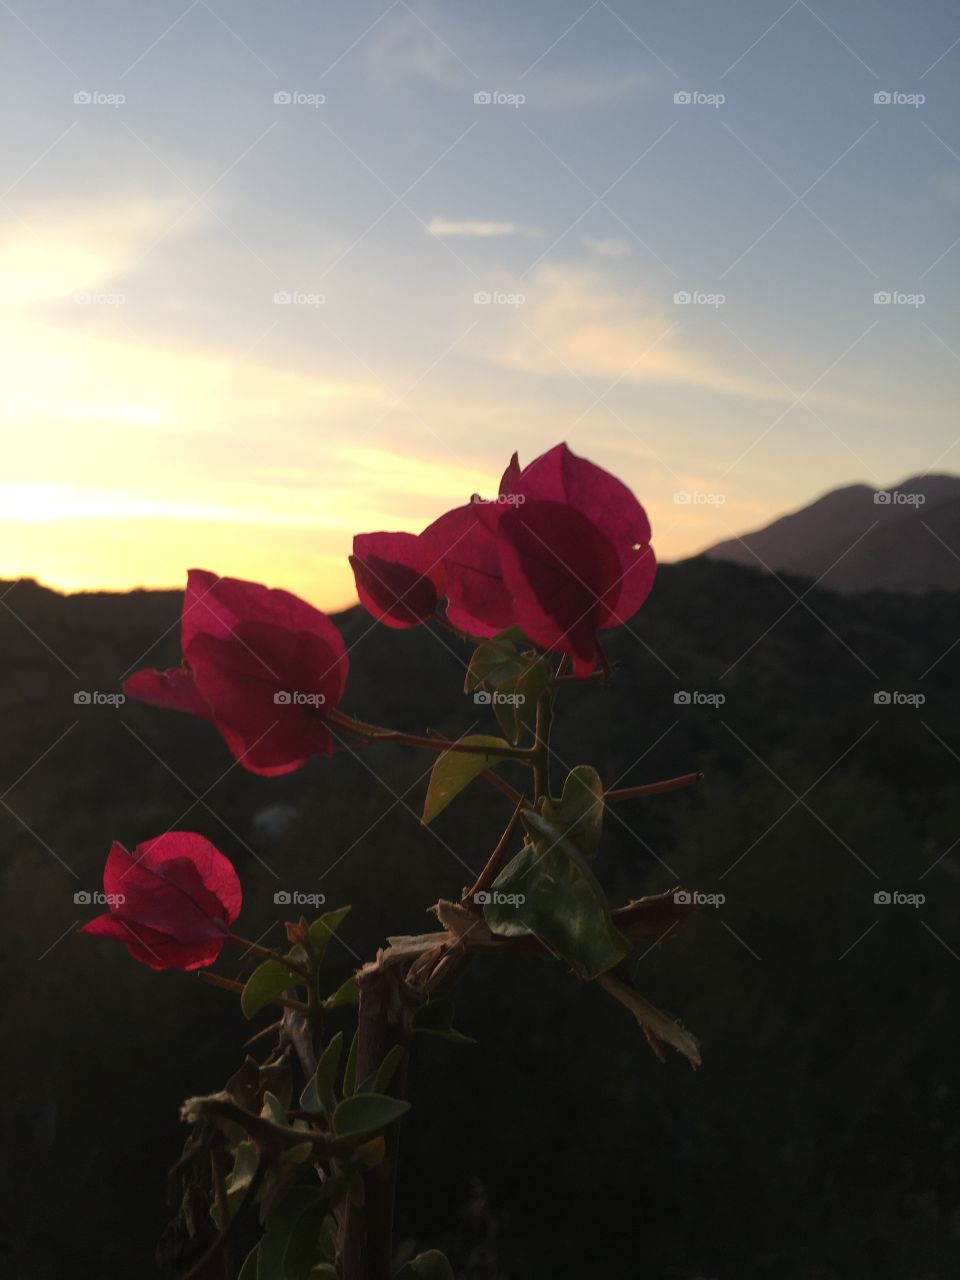 Deep pink Azalea flowers are in full blossom in front of sun kissed skies and distant mountains, distantly shaded lavender in the fading light. 